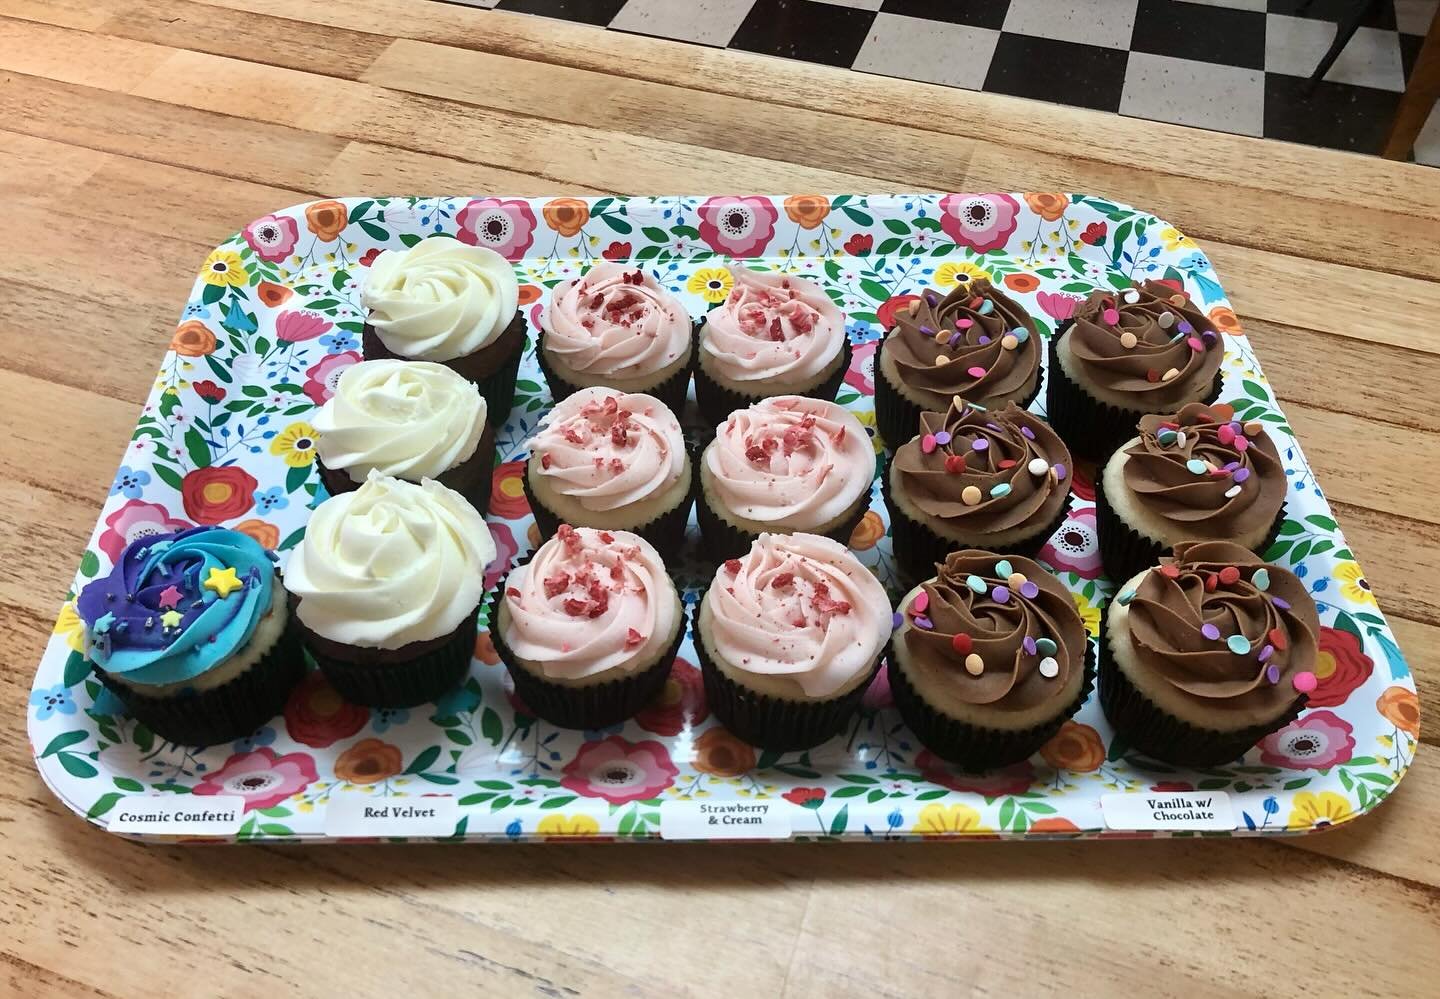 Bring your mom some cupcakes instead of flowers this weekend! @lorenacheesehouse has some delicious options for you! Open Monday-Saturday, 10-6. 102 E Center St, Lorena #johnsonvillecakes #lorenacheesehouse #mothersdaywaco #downtownlorenatx #wacomoth